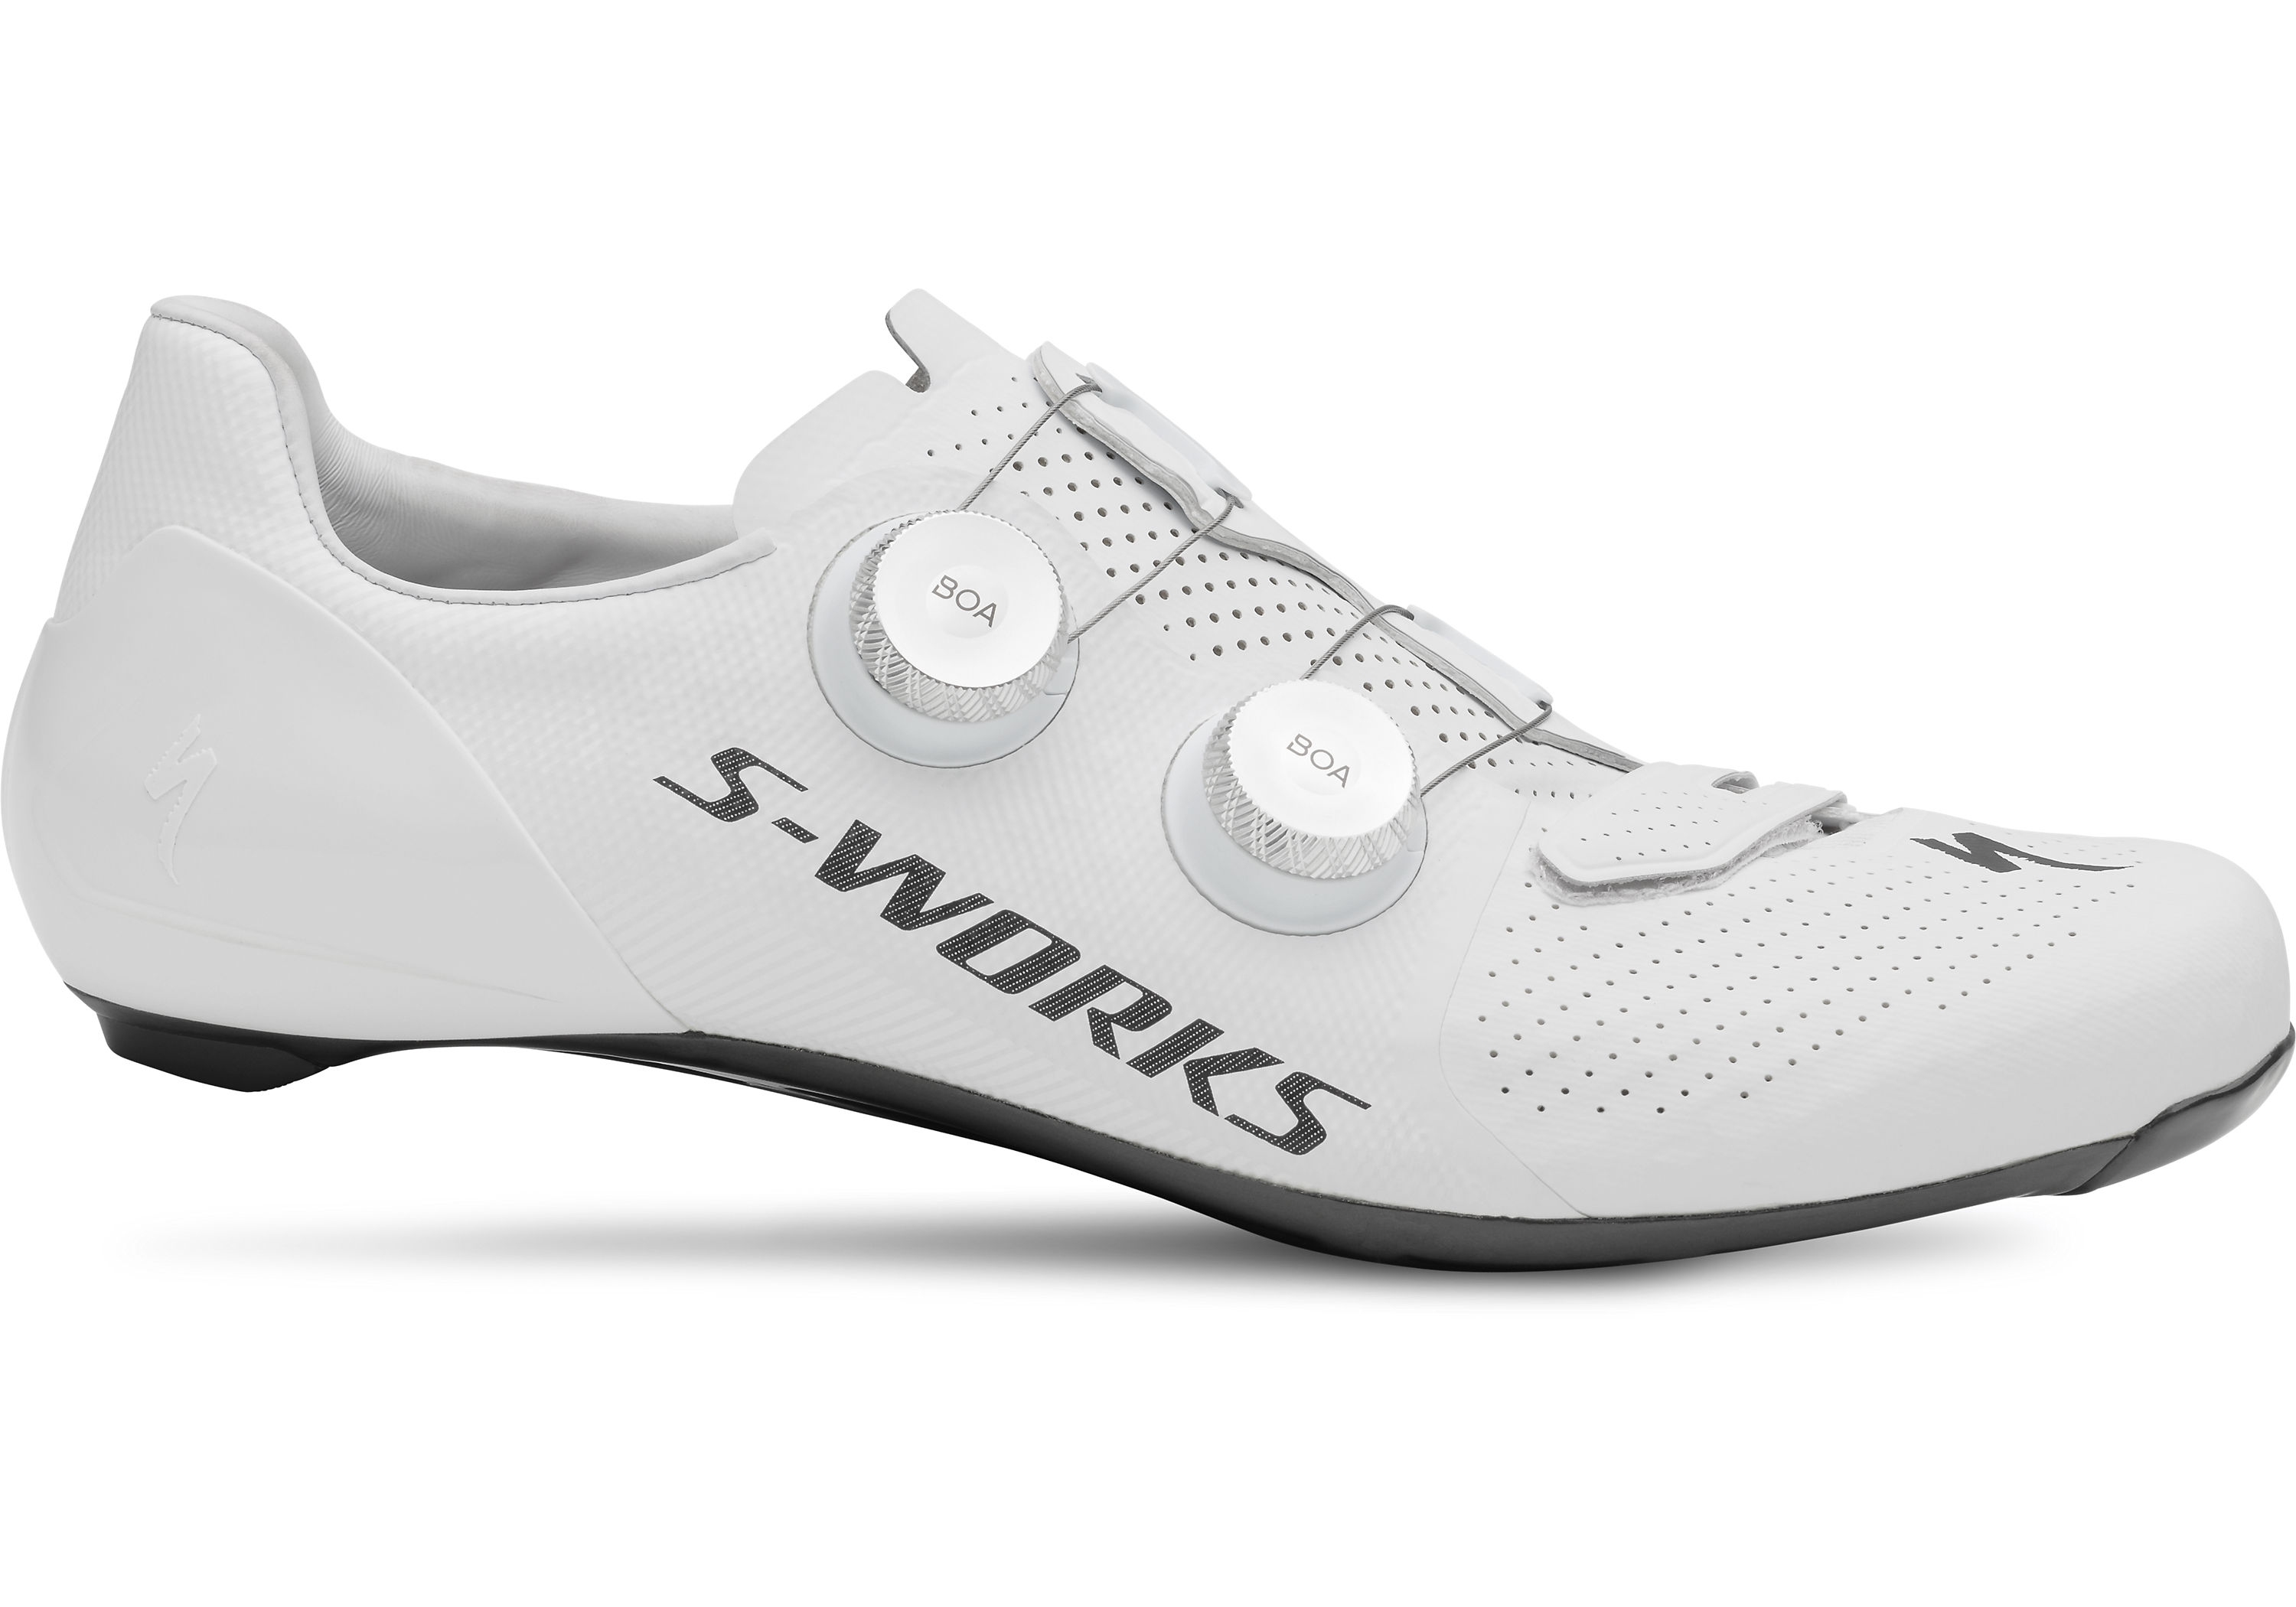 SPECIALIZED New S-Works 7 Road Shoe